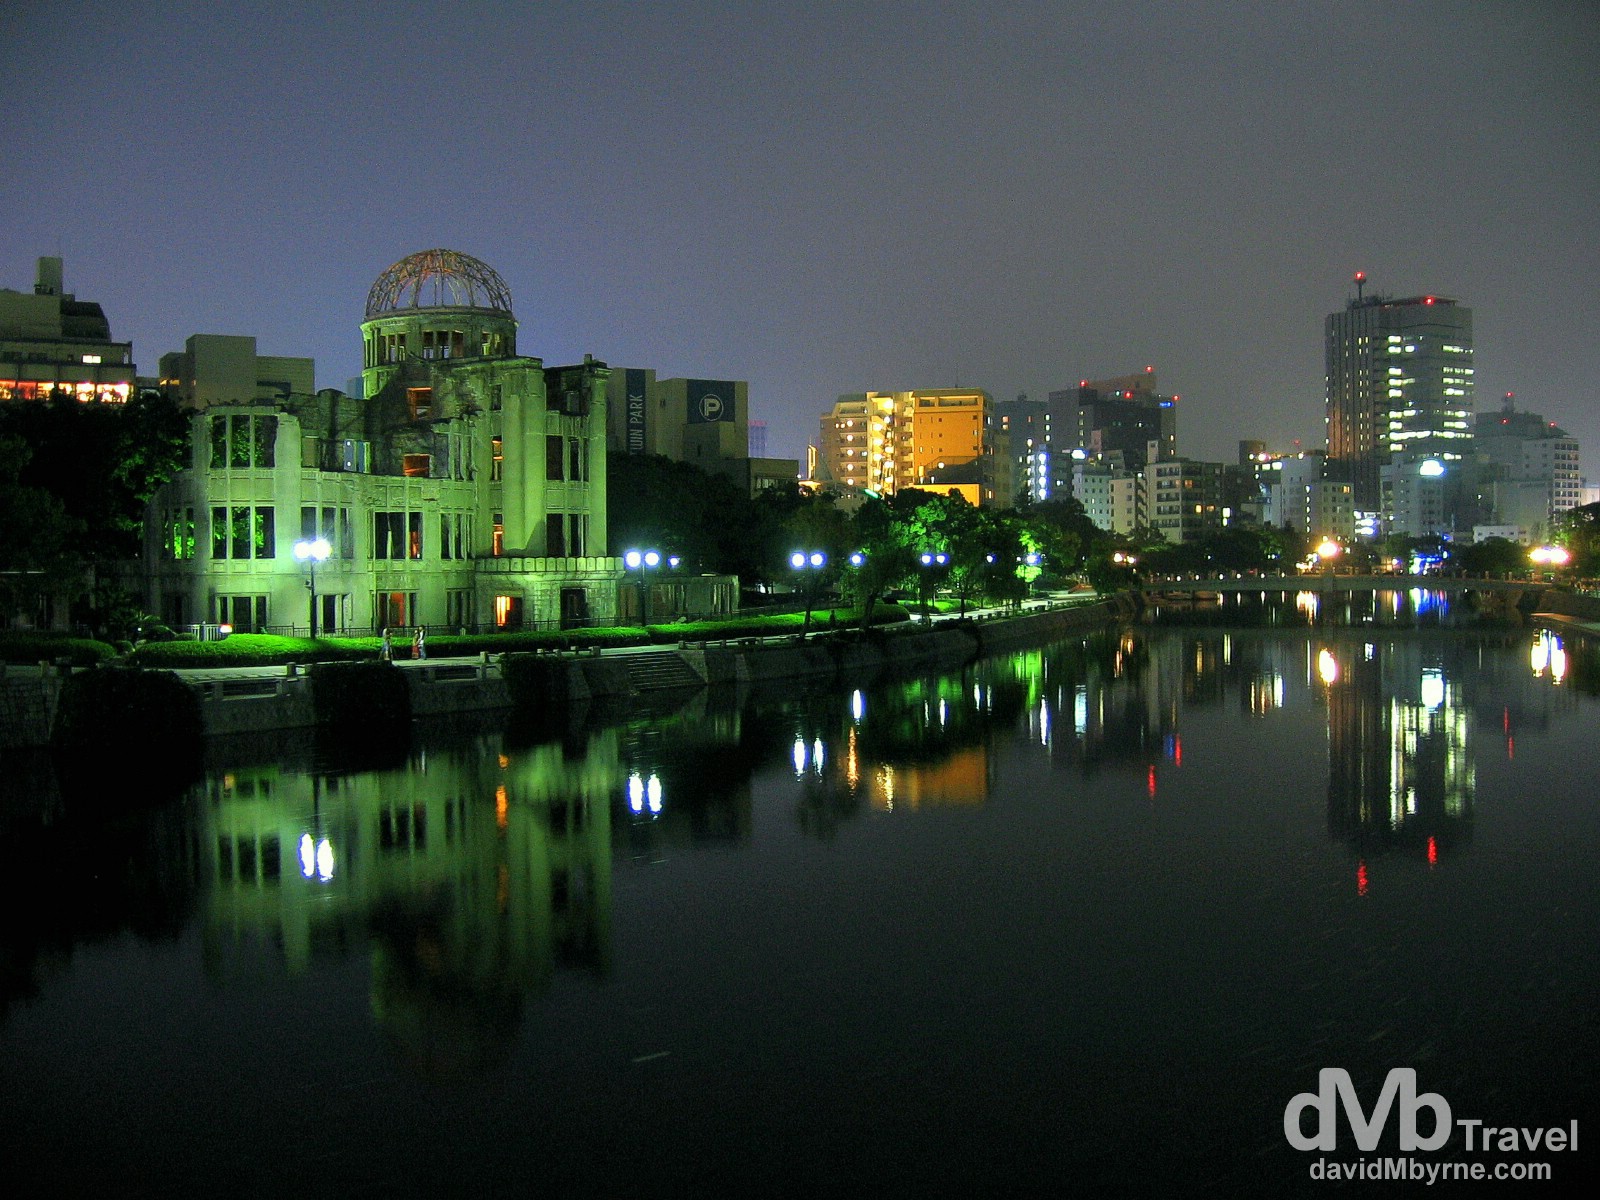 The A-Bomb dome as seen from the T-bridge over the Aioi River in Hiroshima, Honshu, Japan. July 22nd 2005.